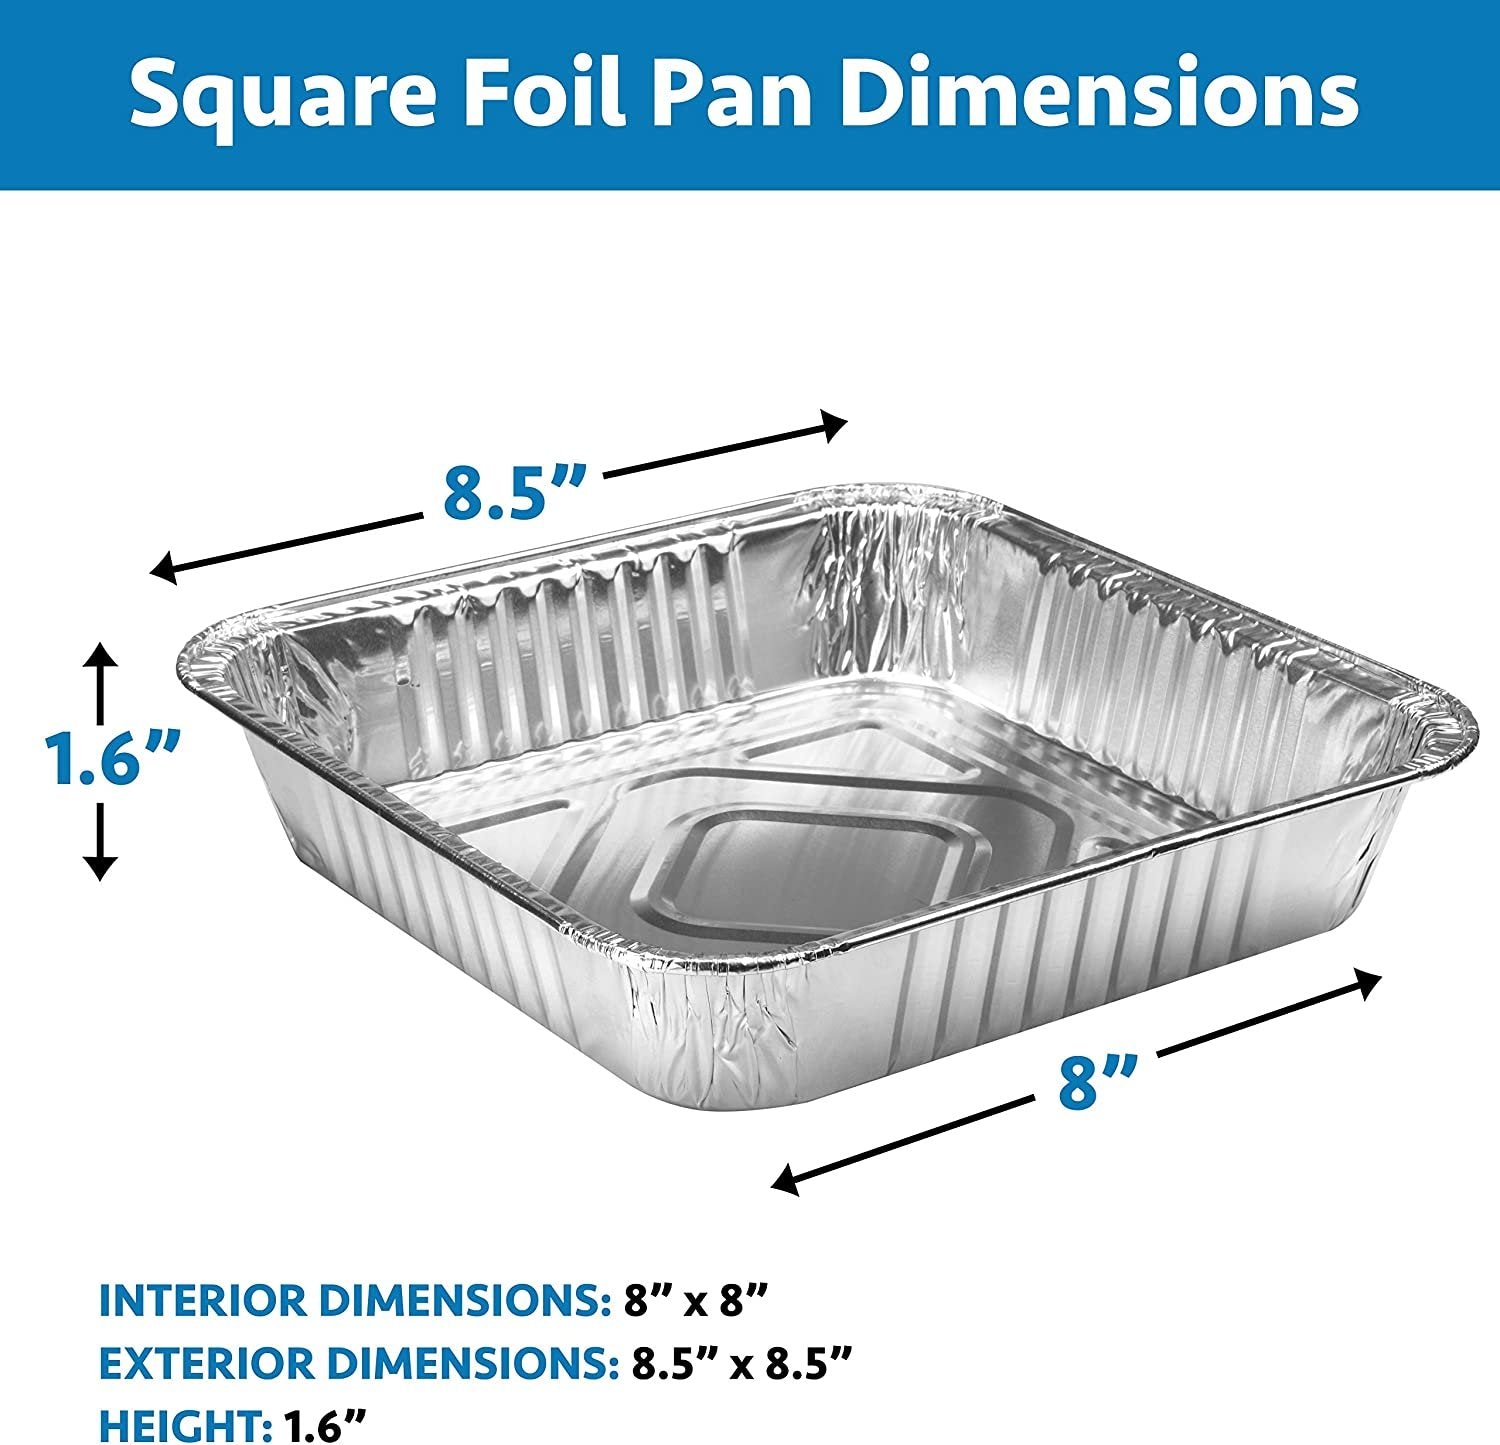 Aluminum Pans 9x13 [30 Pack] Aluminum Foil Pans Trays - Disposable Pans for  Baking, BBQ Grilling, Roasting, Cake Serving Dishes, Catering Supplies